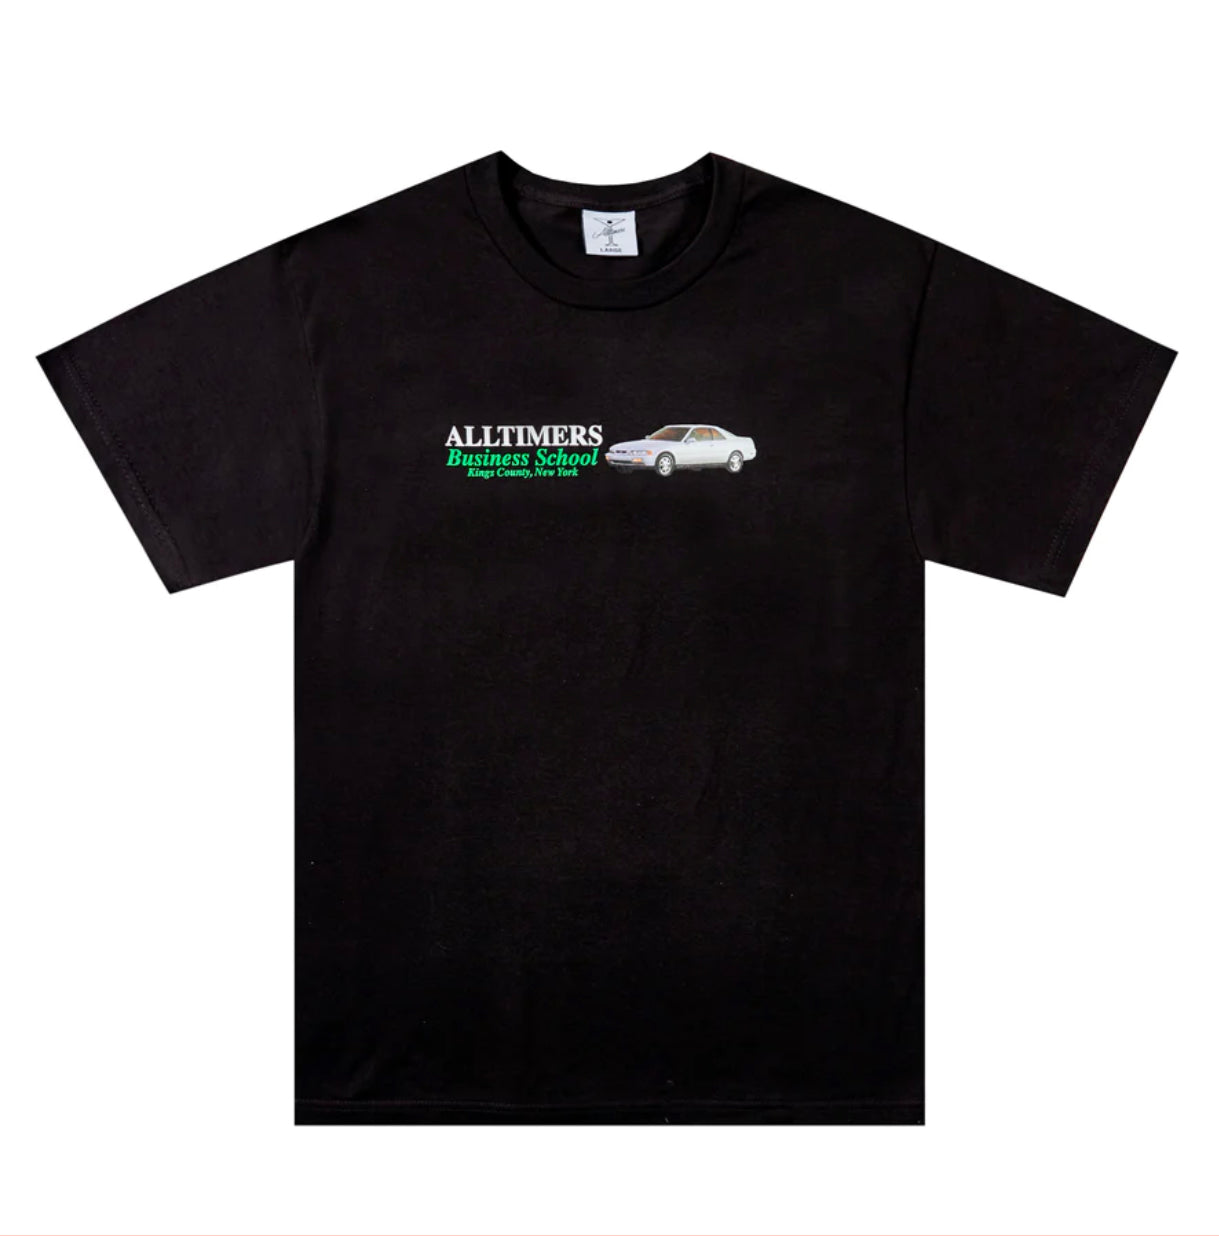 Alltimers Kings Country T-Shirt - Black